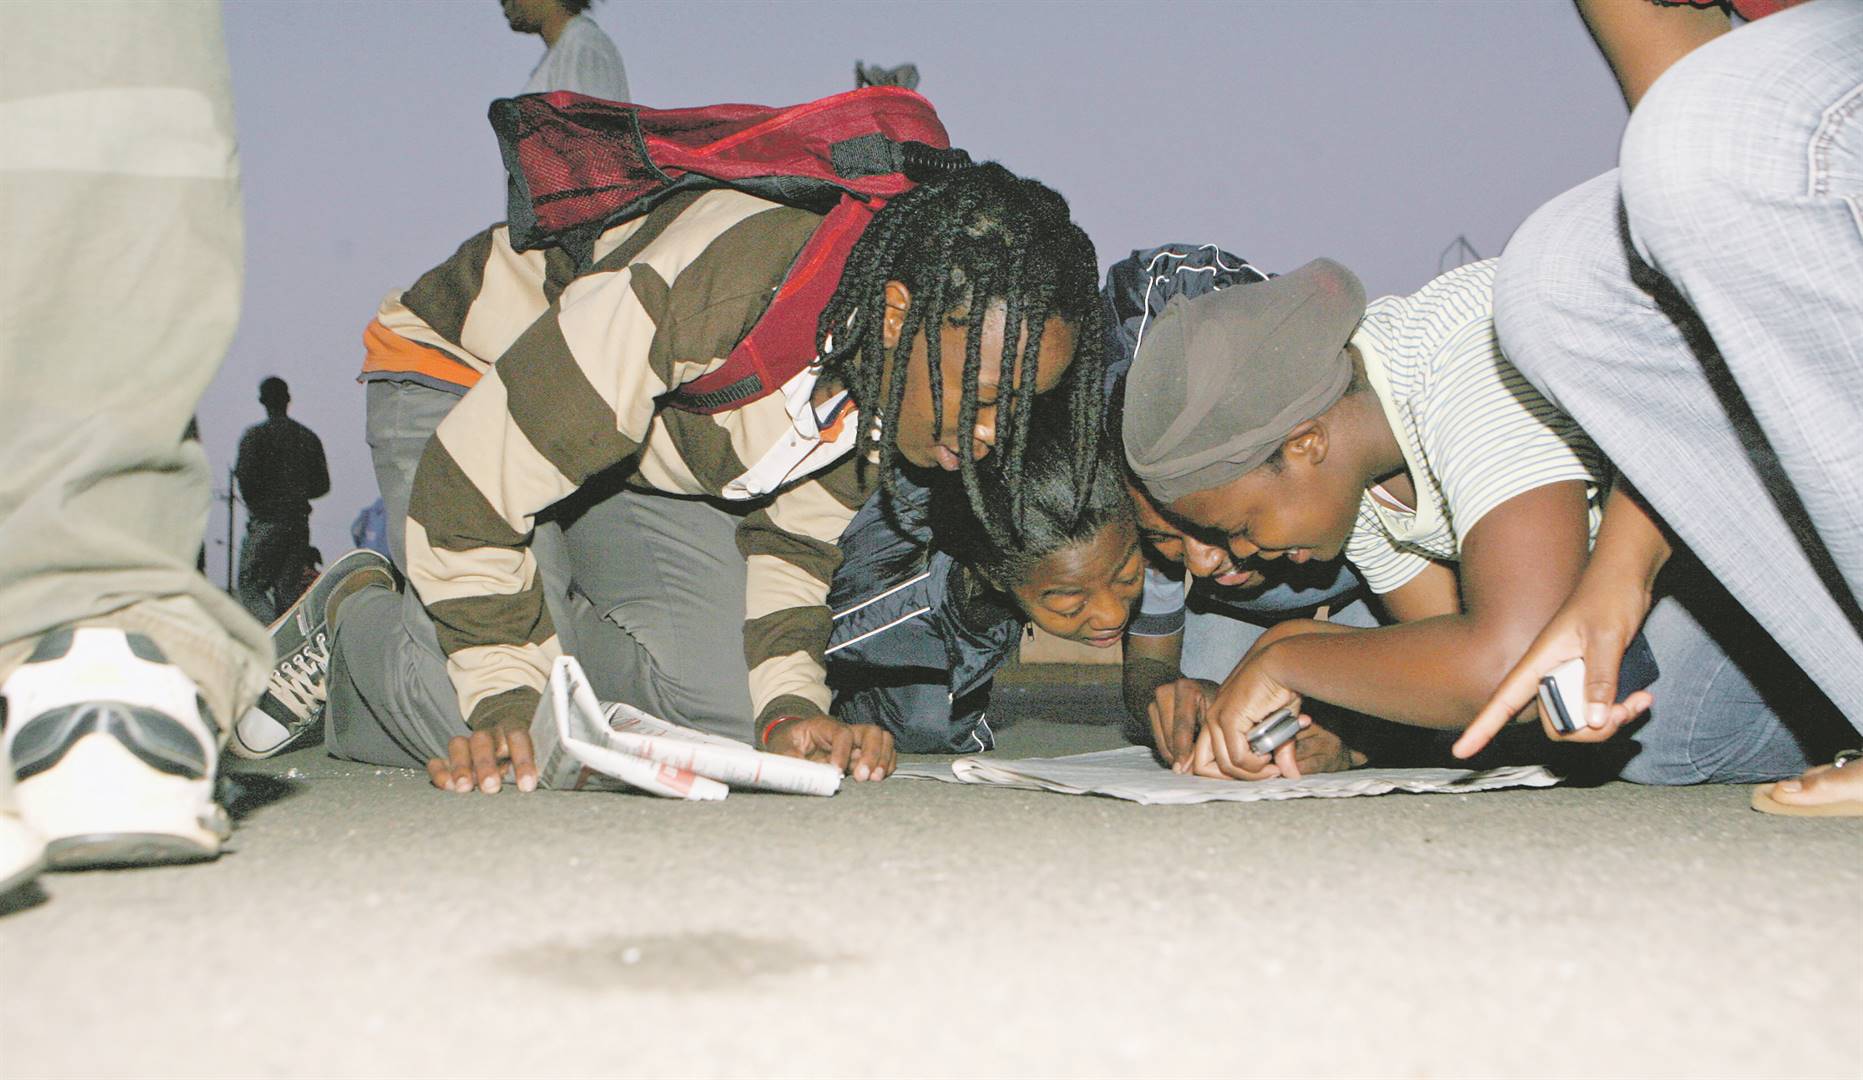 scouring the paper Matriculants search for their names and results. Photo: Mlandeli Puzi